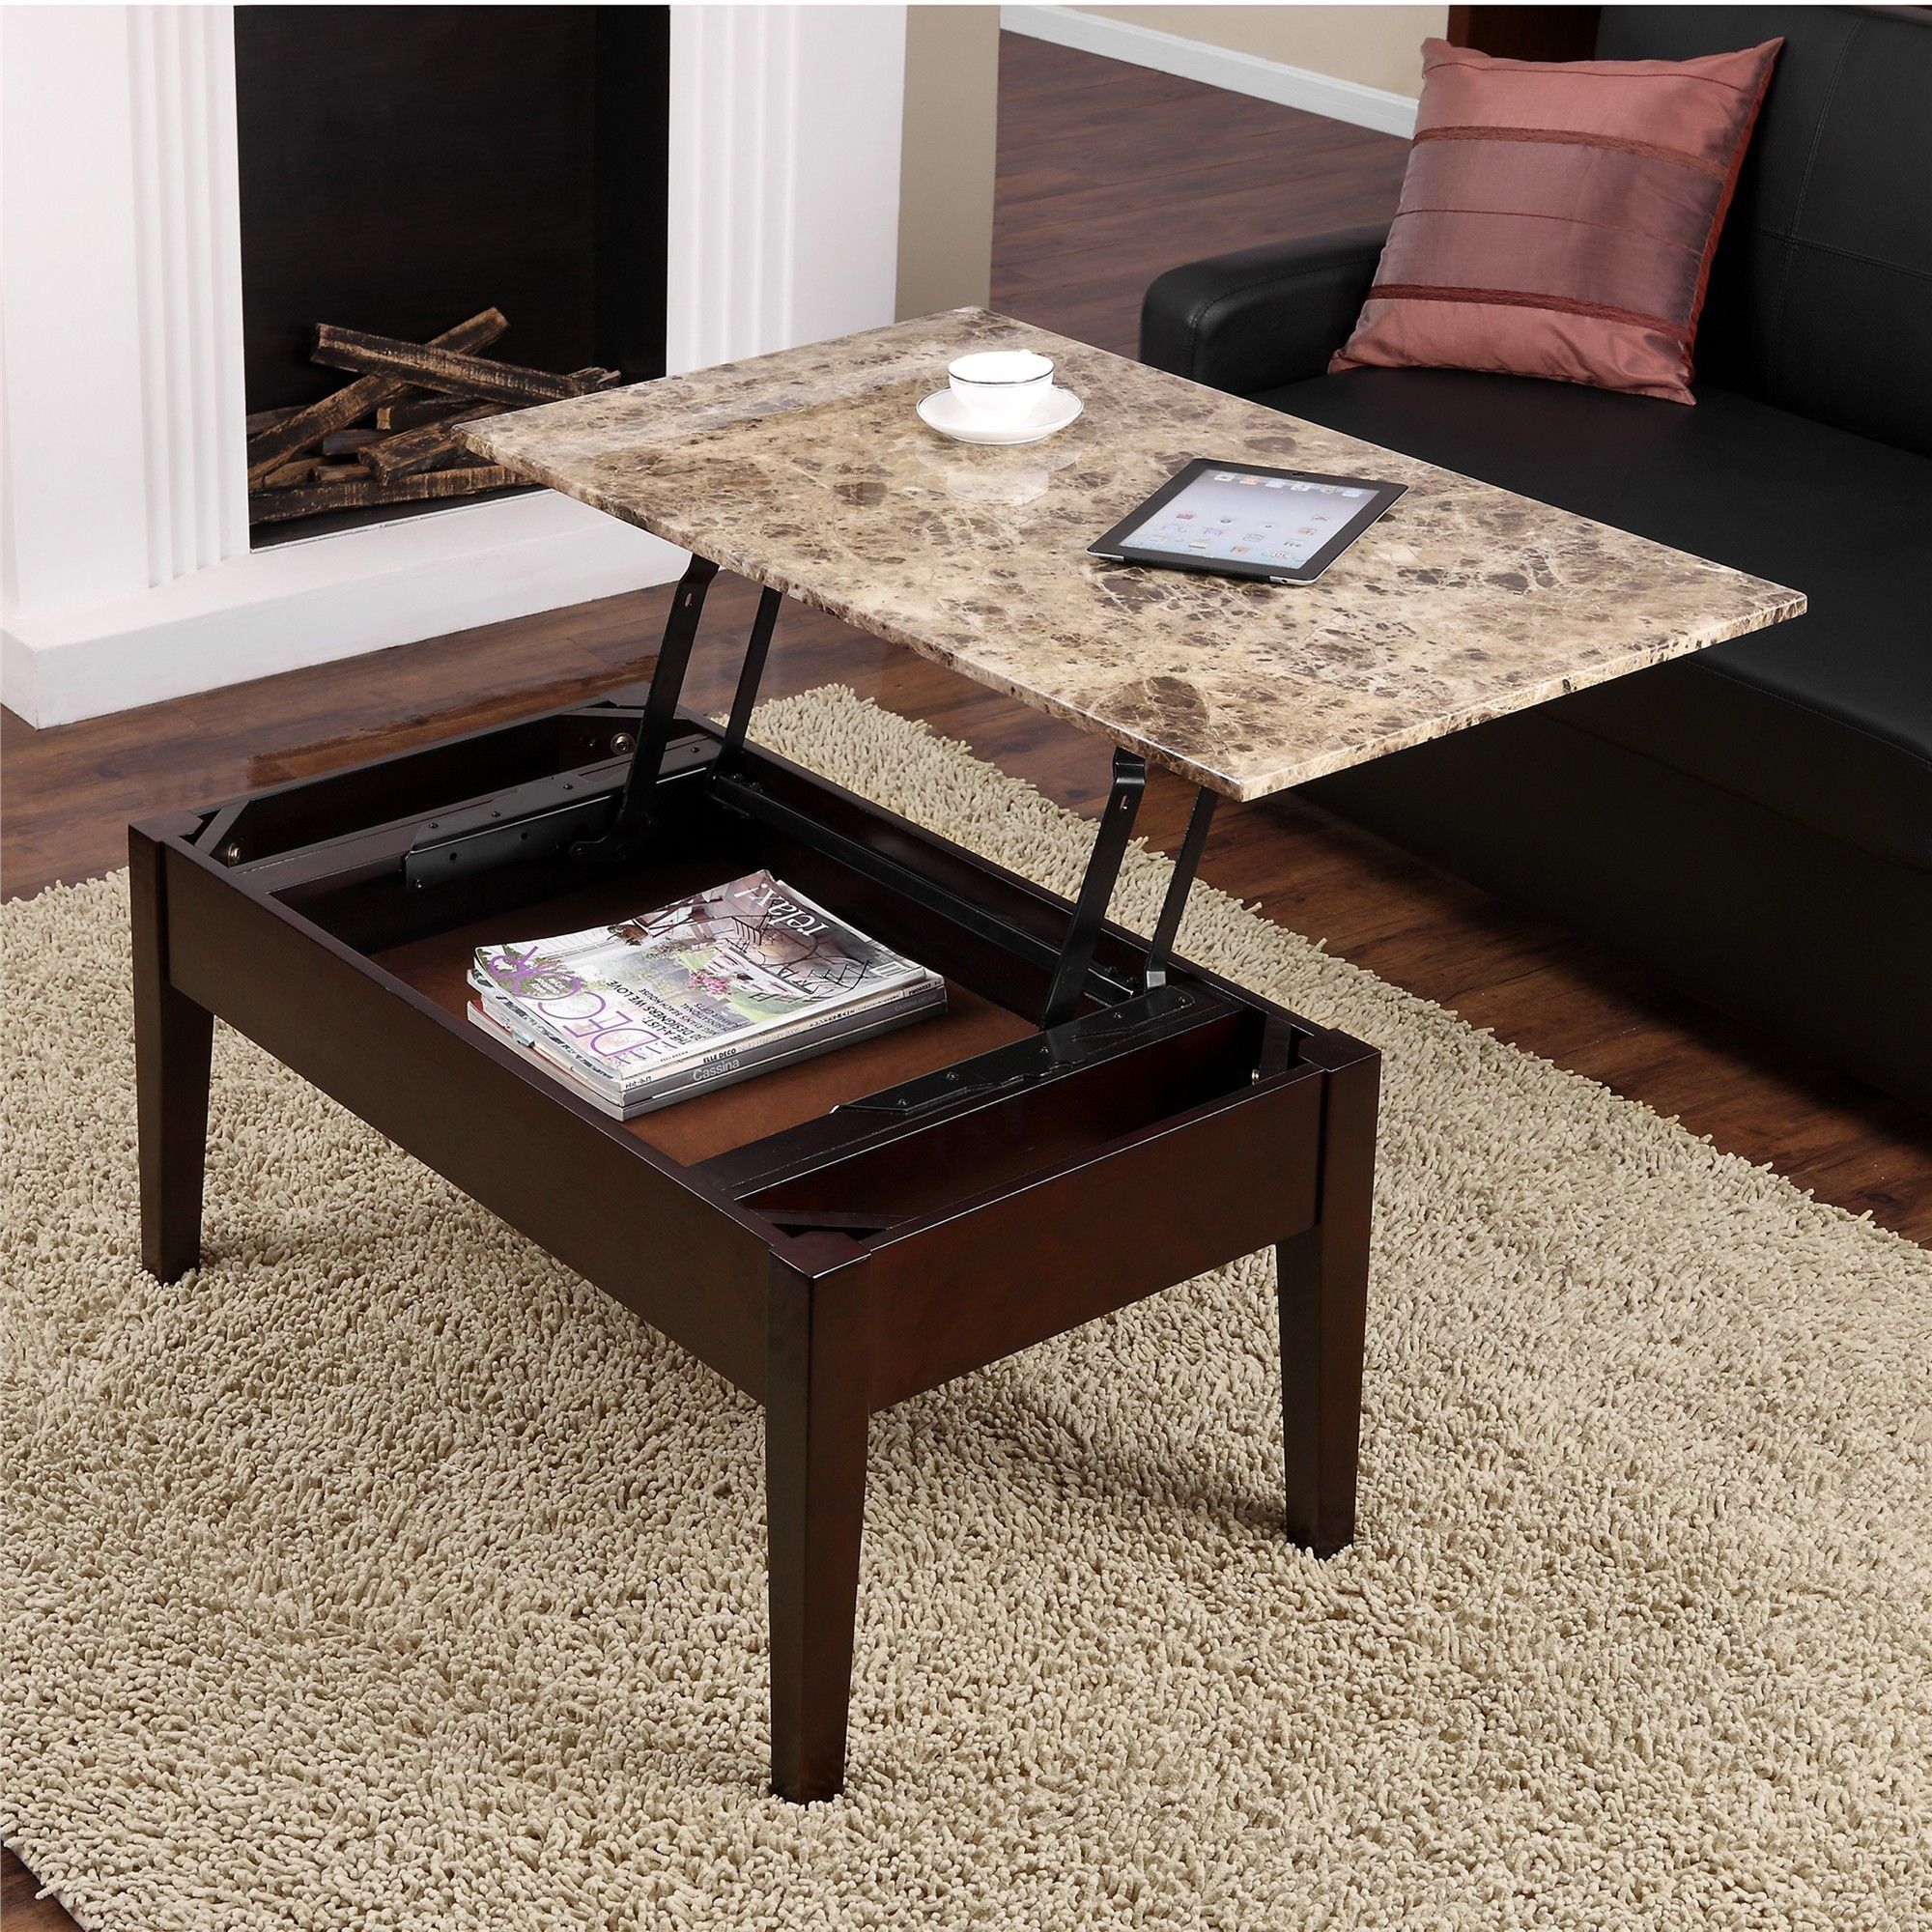 Dorel Living Faux Marble Lift Top Coffee Table – – 11190142 | Coffee Inside Lift Top Coffee Tables With Storage Drawers (View 19 of 20)